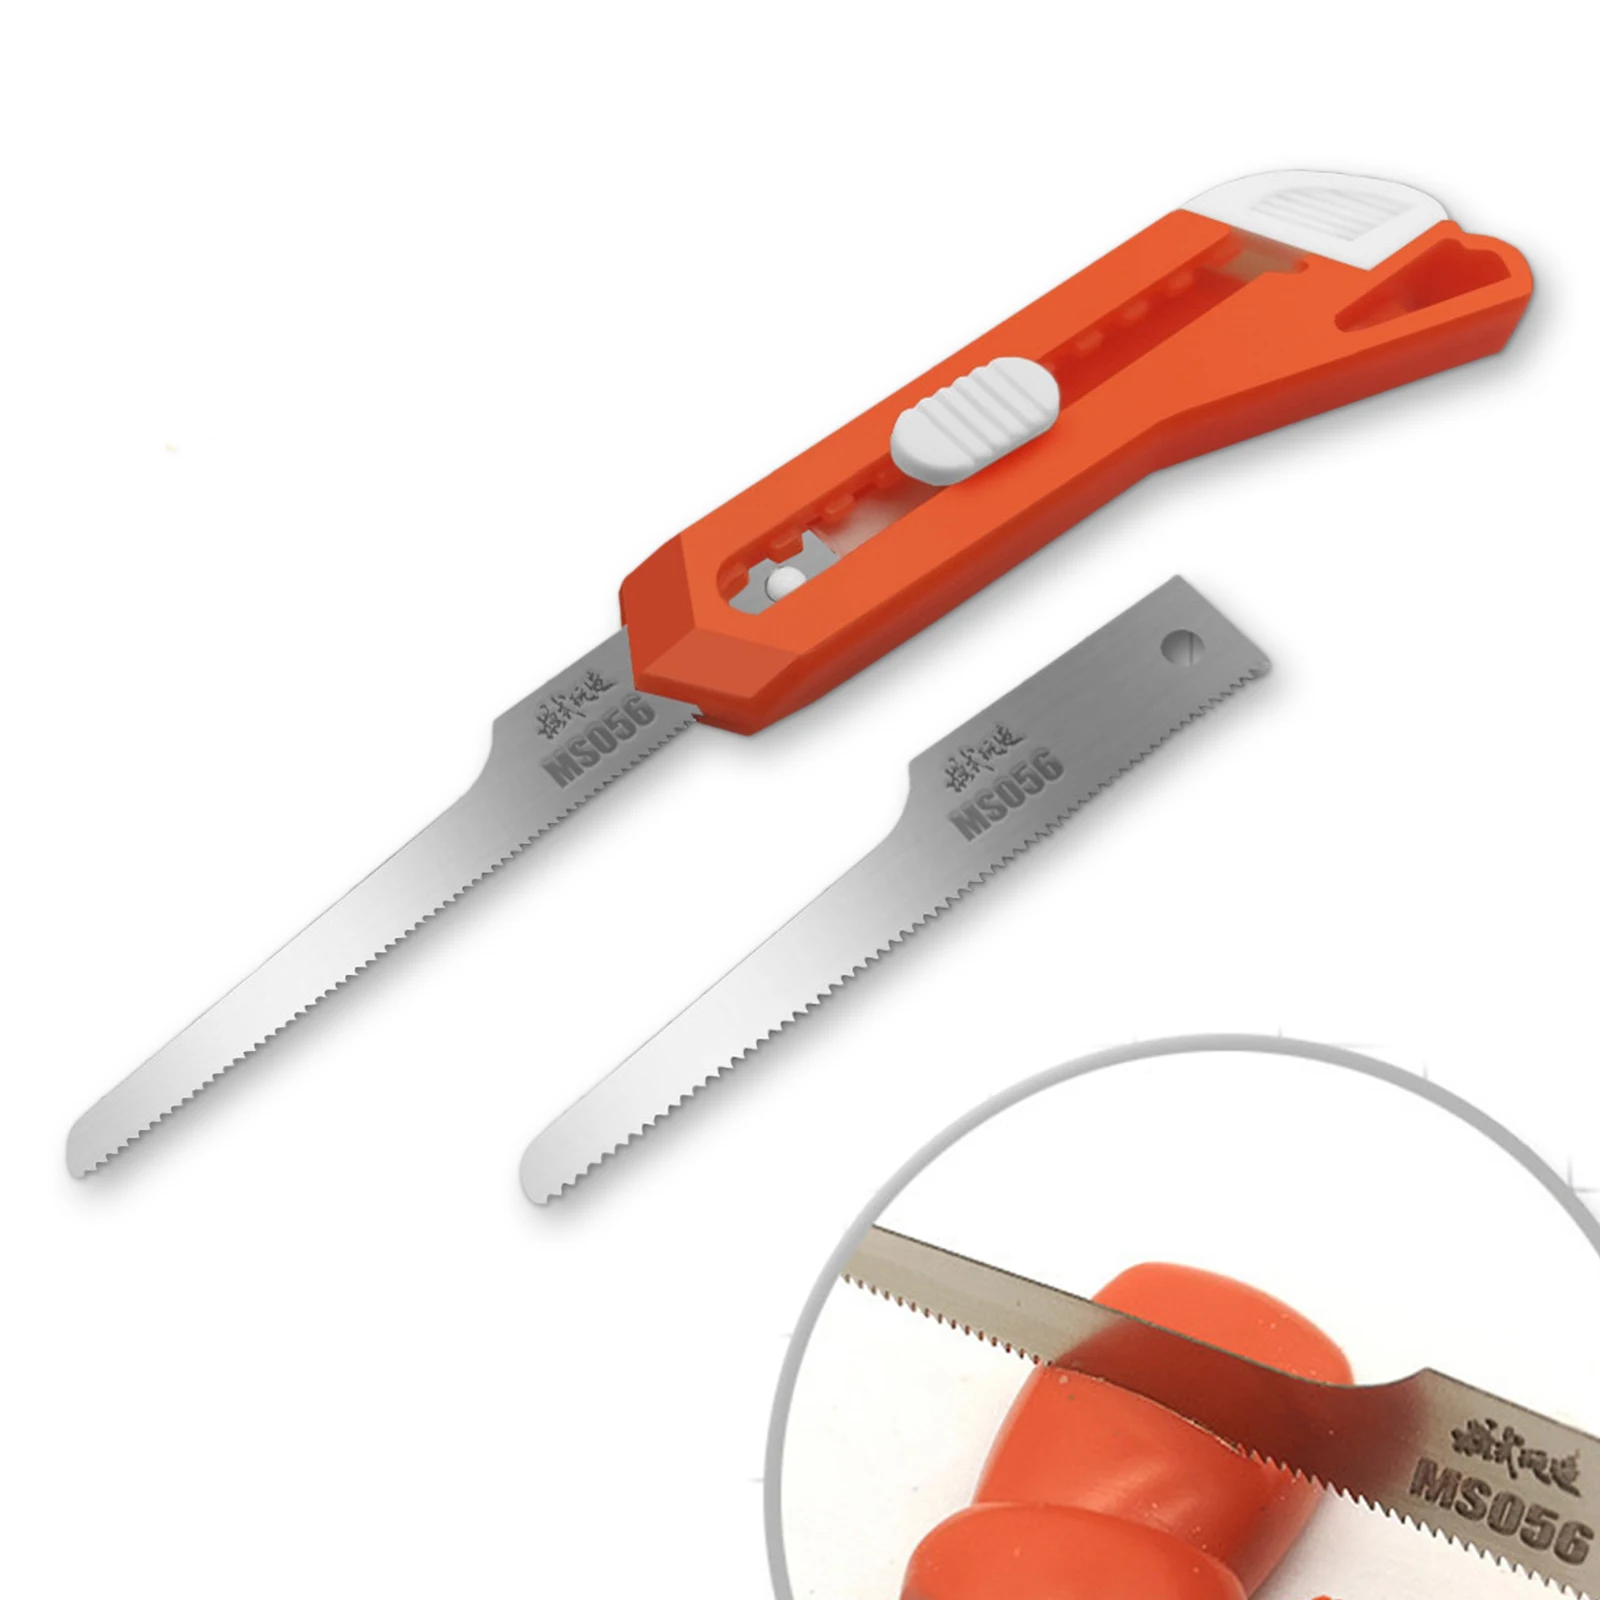 Handy Multifunction Model Mini Hand Saw Knife Blade Cutter 2in1 Craft Tool